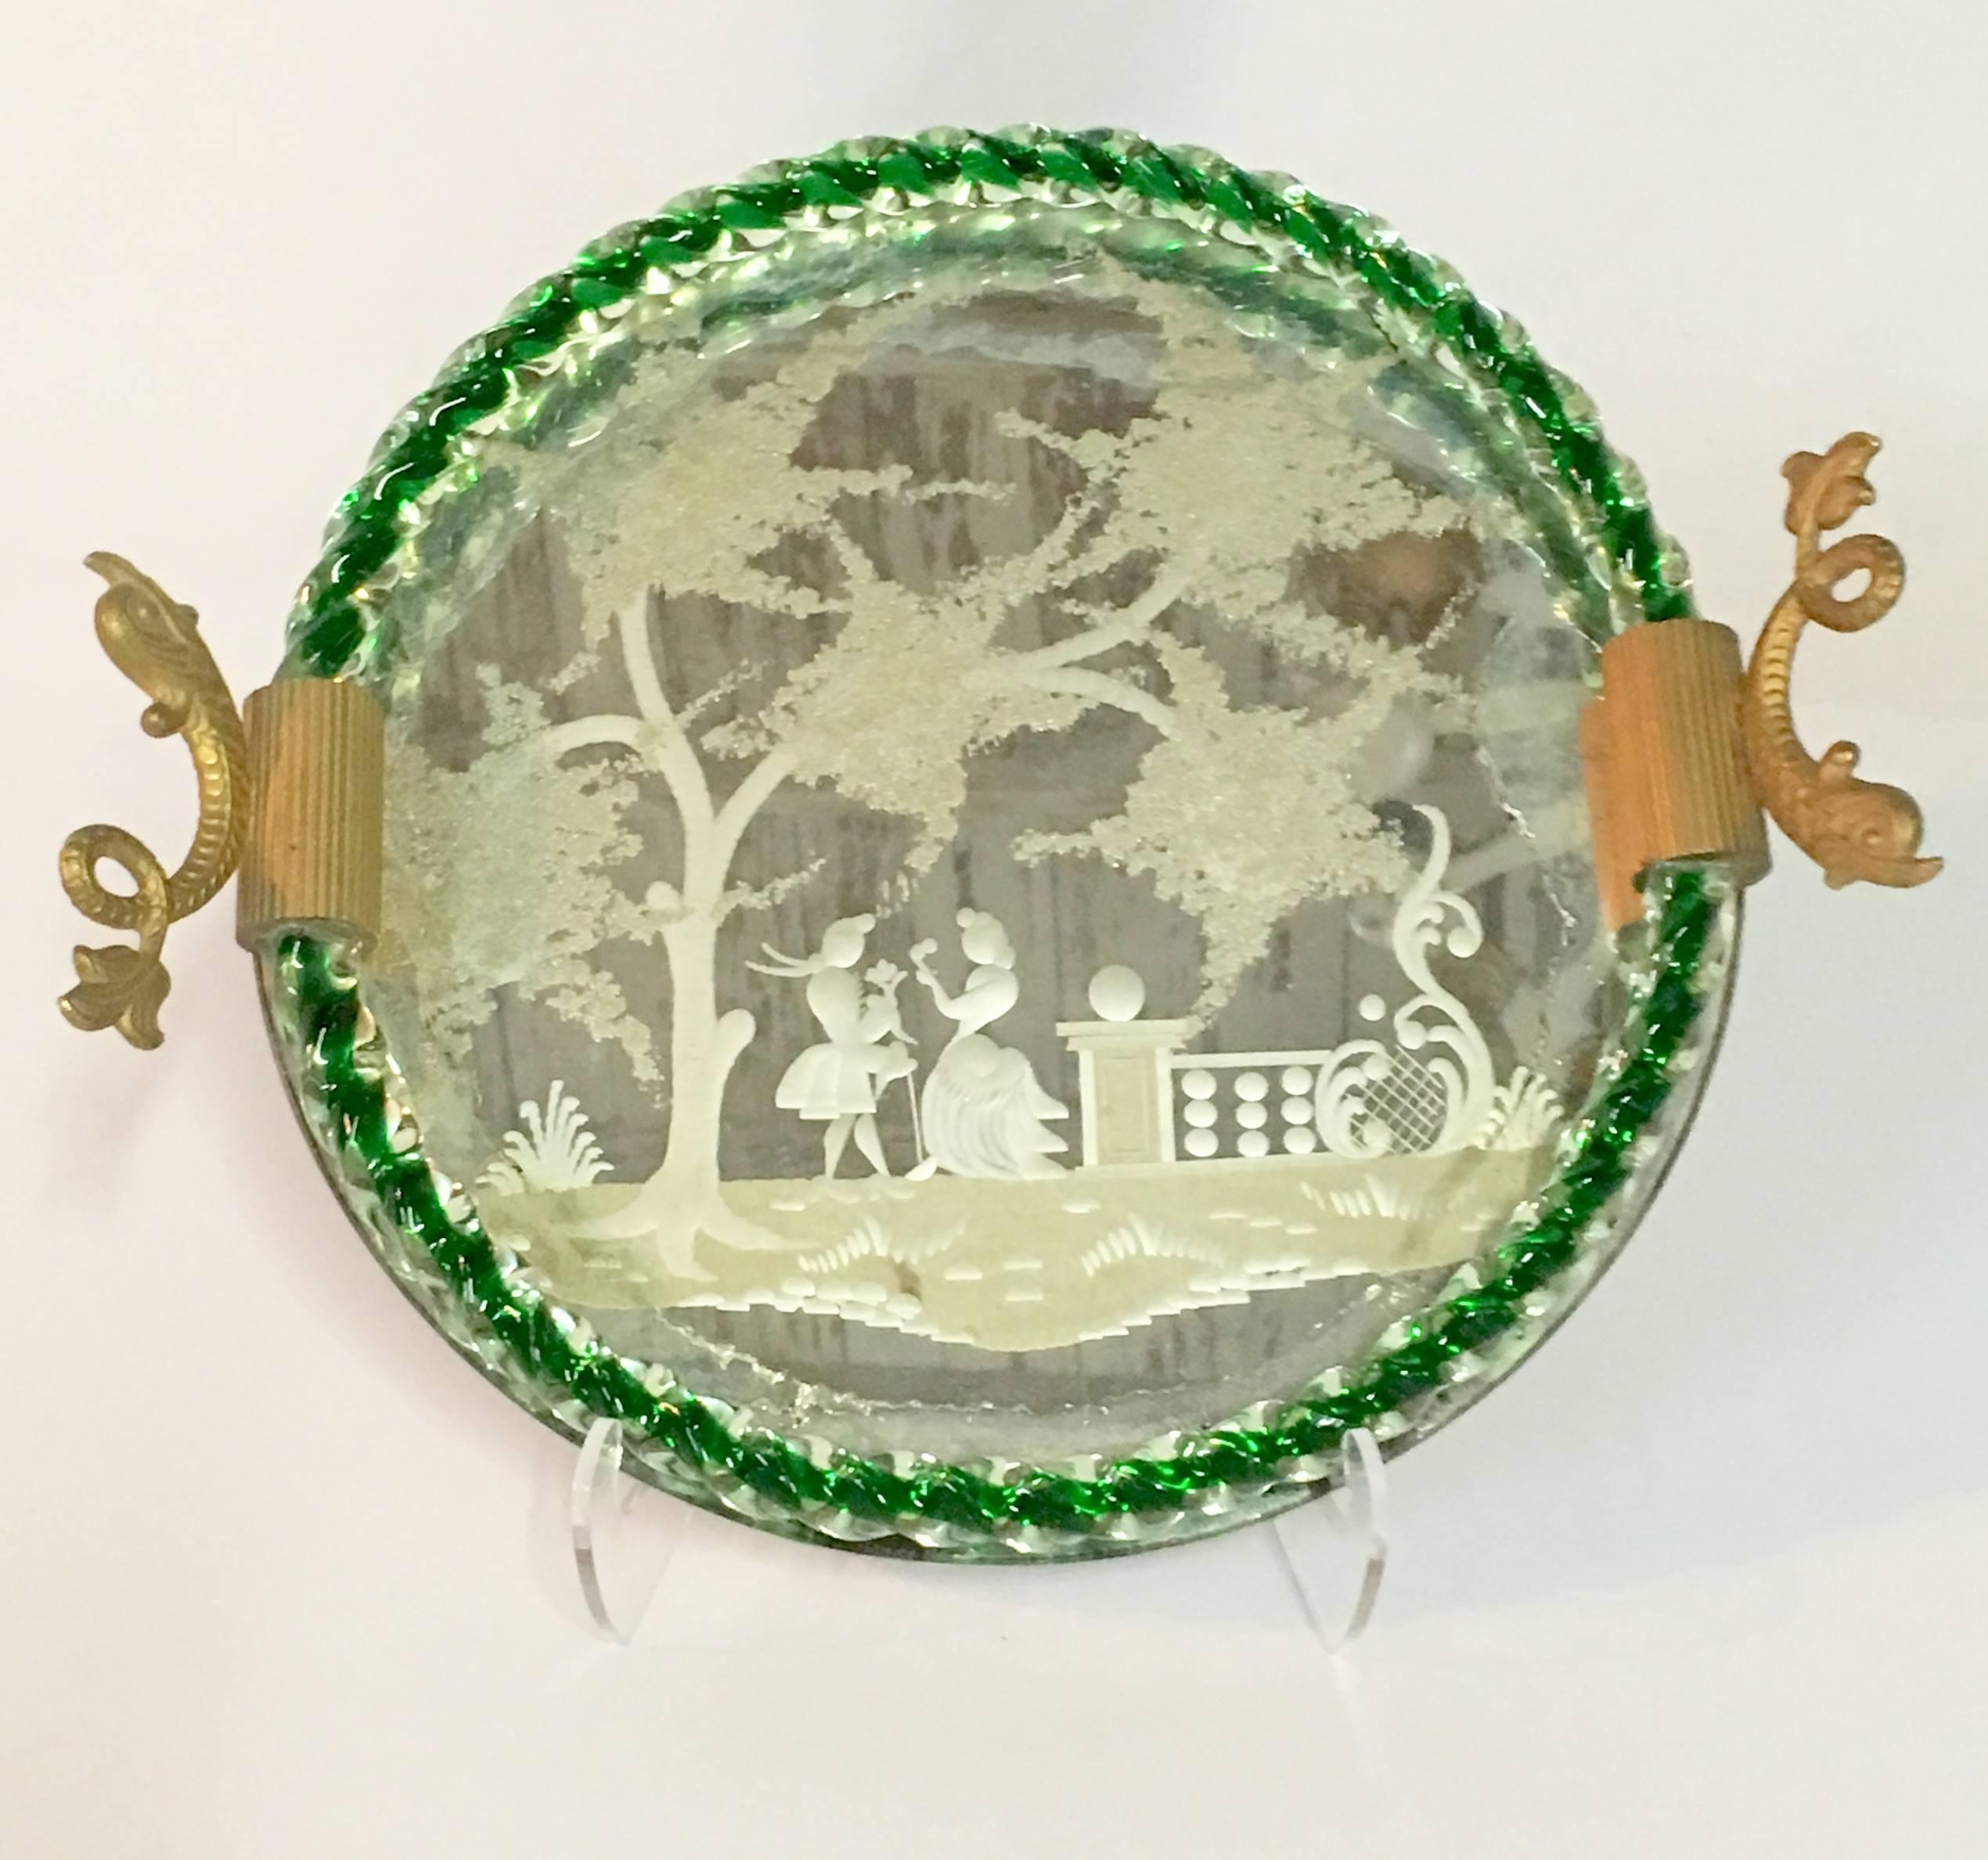 Vintage Italian Venetian and Murano glass, etched mirror gilt brass dolphin handle round tray. This very special piece features a courting couple in a garden motif etched mirror with Murano clear and emerald green rope glass trim surround detail